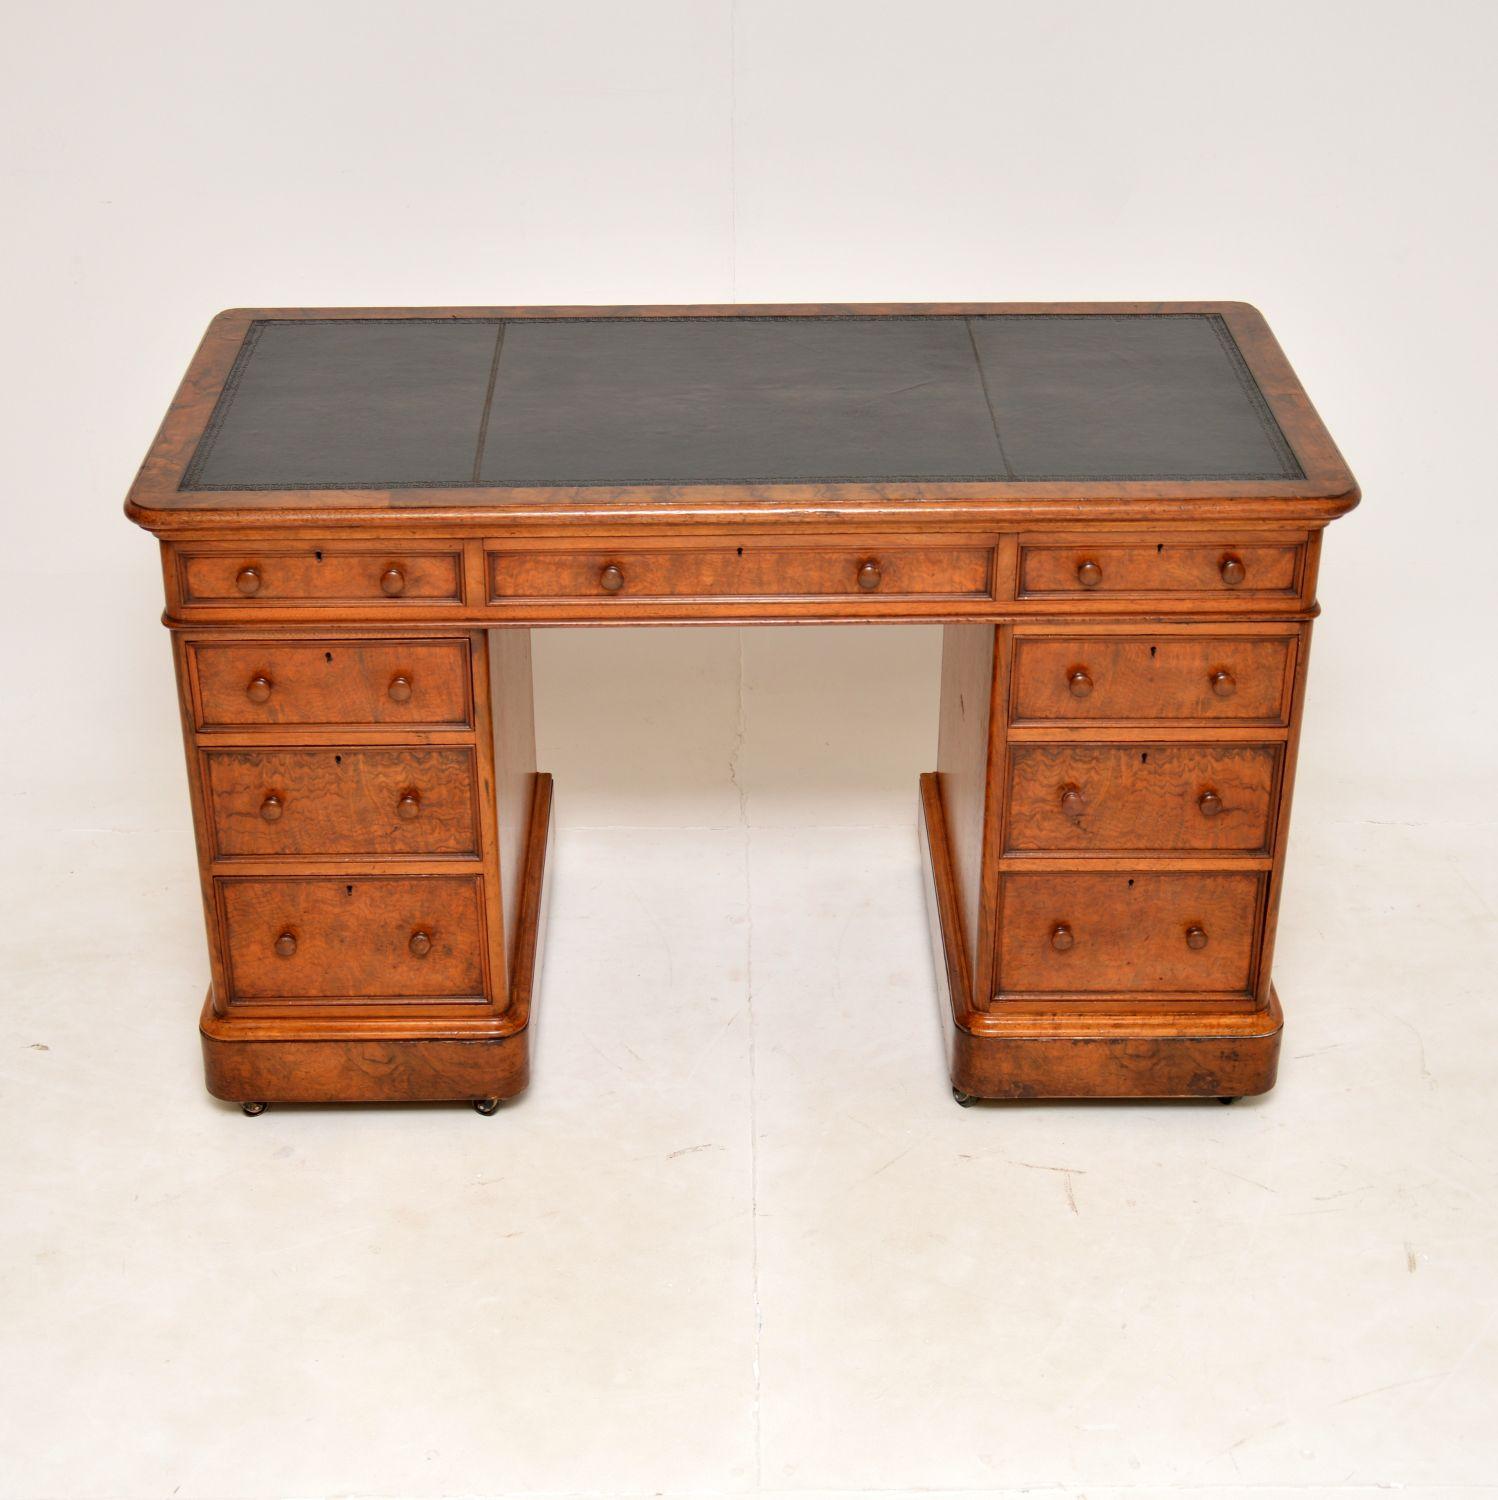 An excellent antique Victorian pedestal desk in walnut, this was made in England and date from around the 1860-1880 period.

The quality is outstanding, this is so very well made and is a useful size. The top edges, drawer fronts have stunning burr